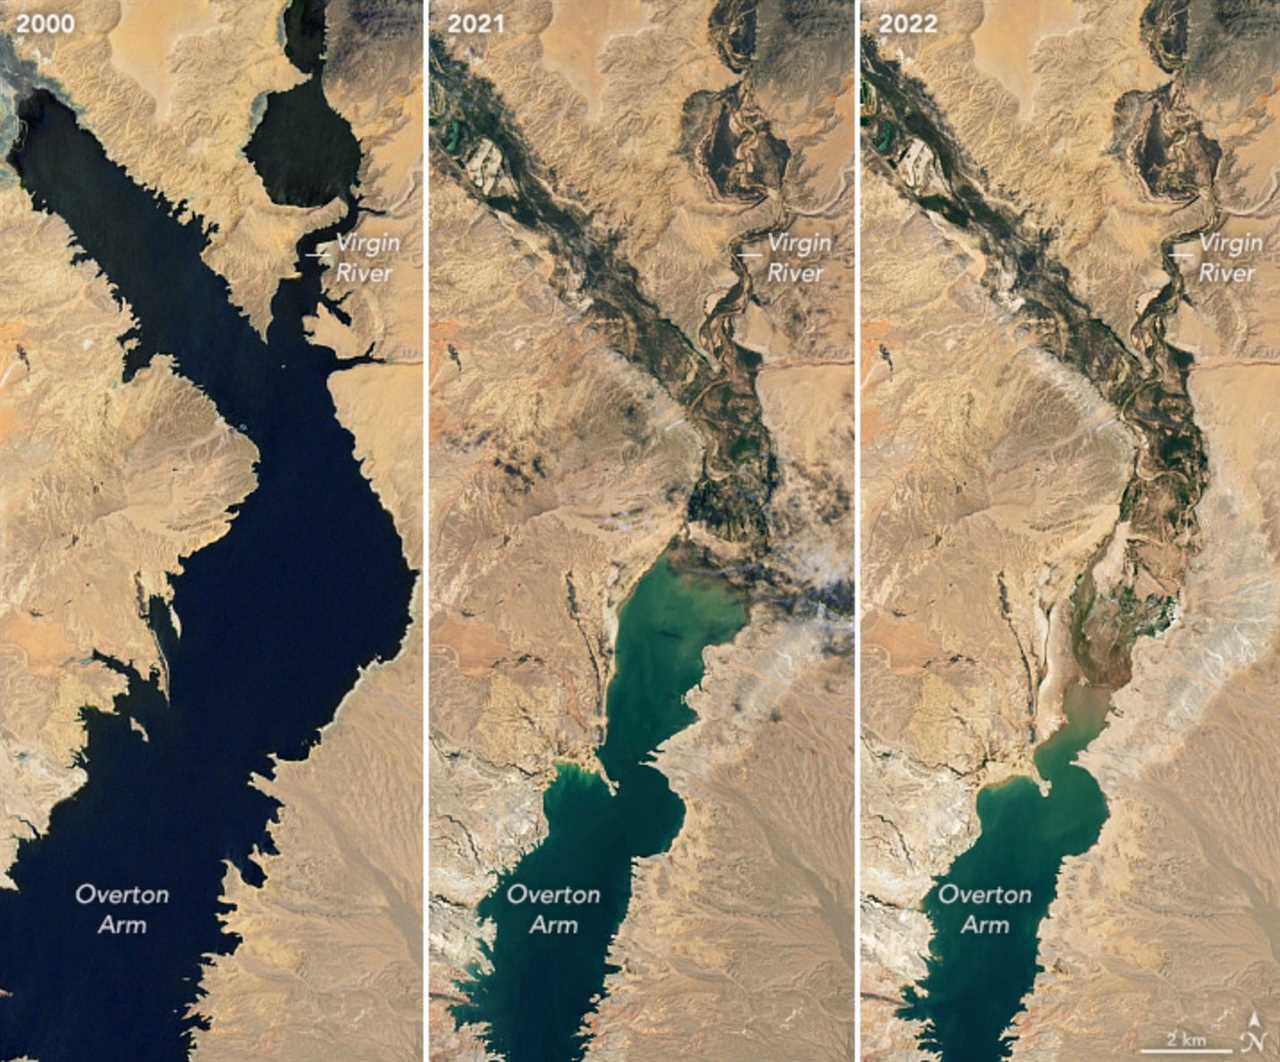 Lake Mead water loss over the last 22 years